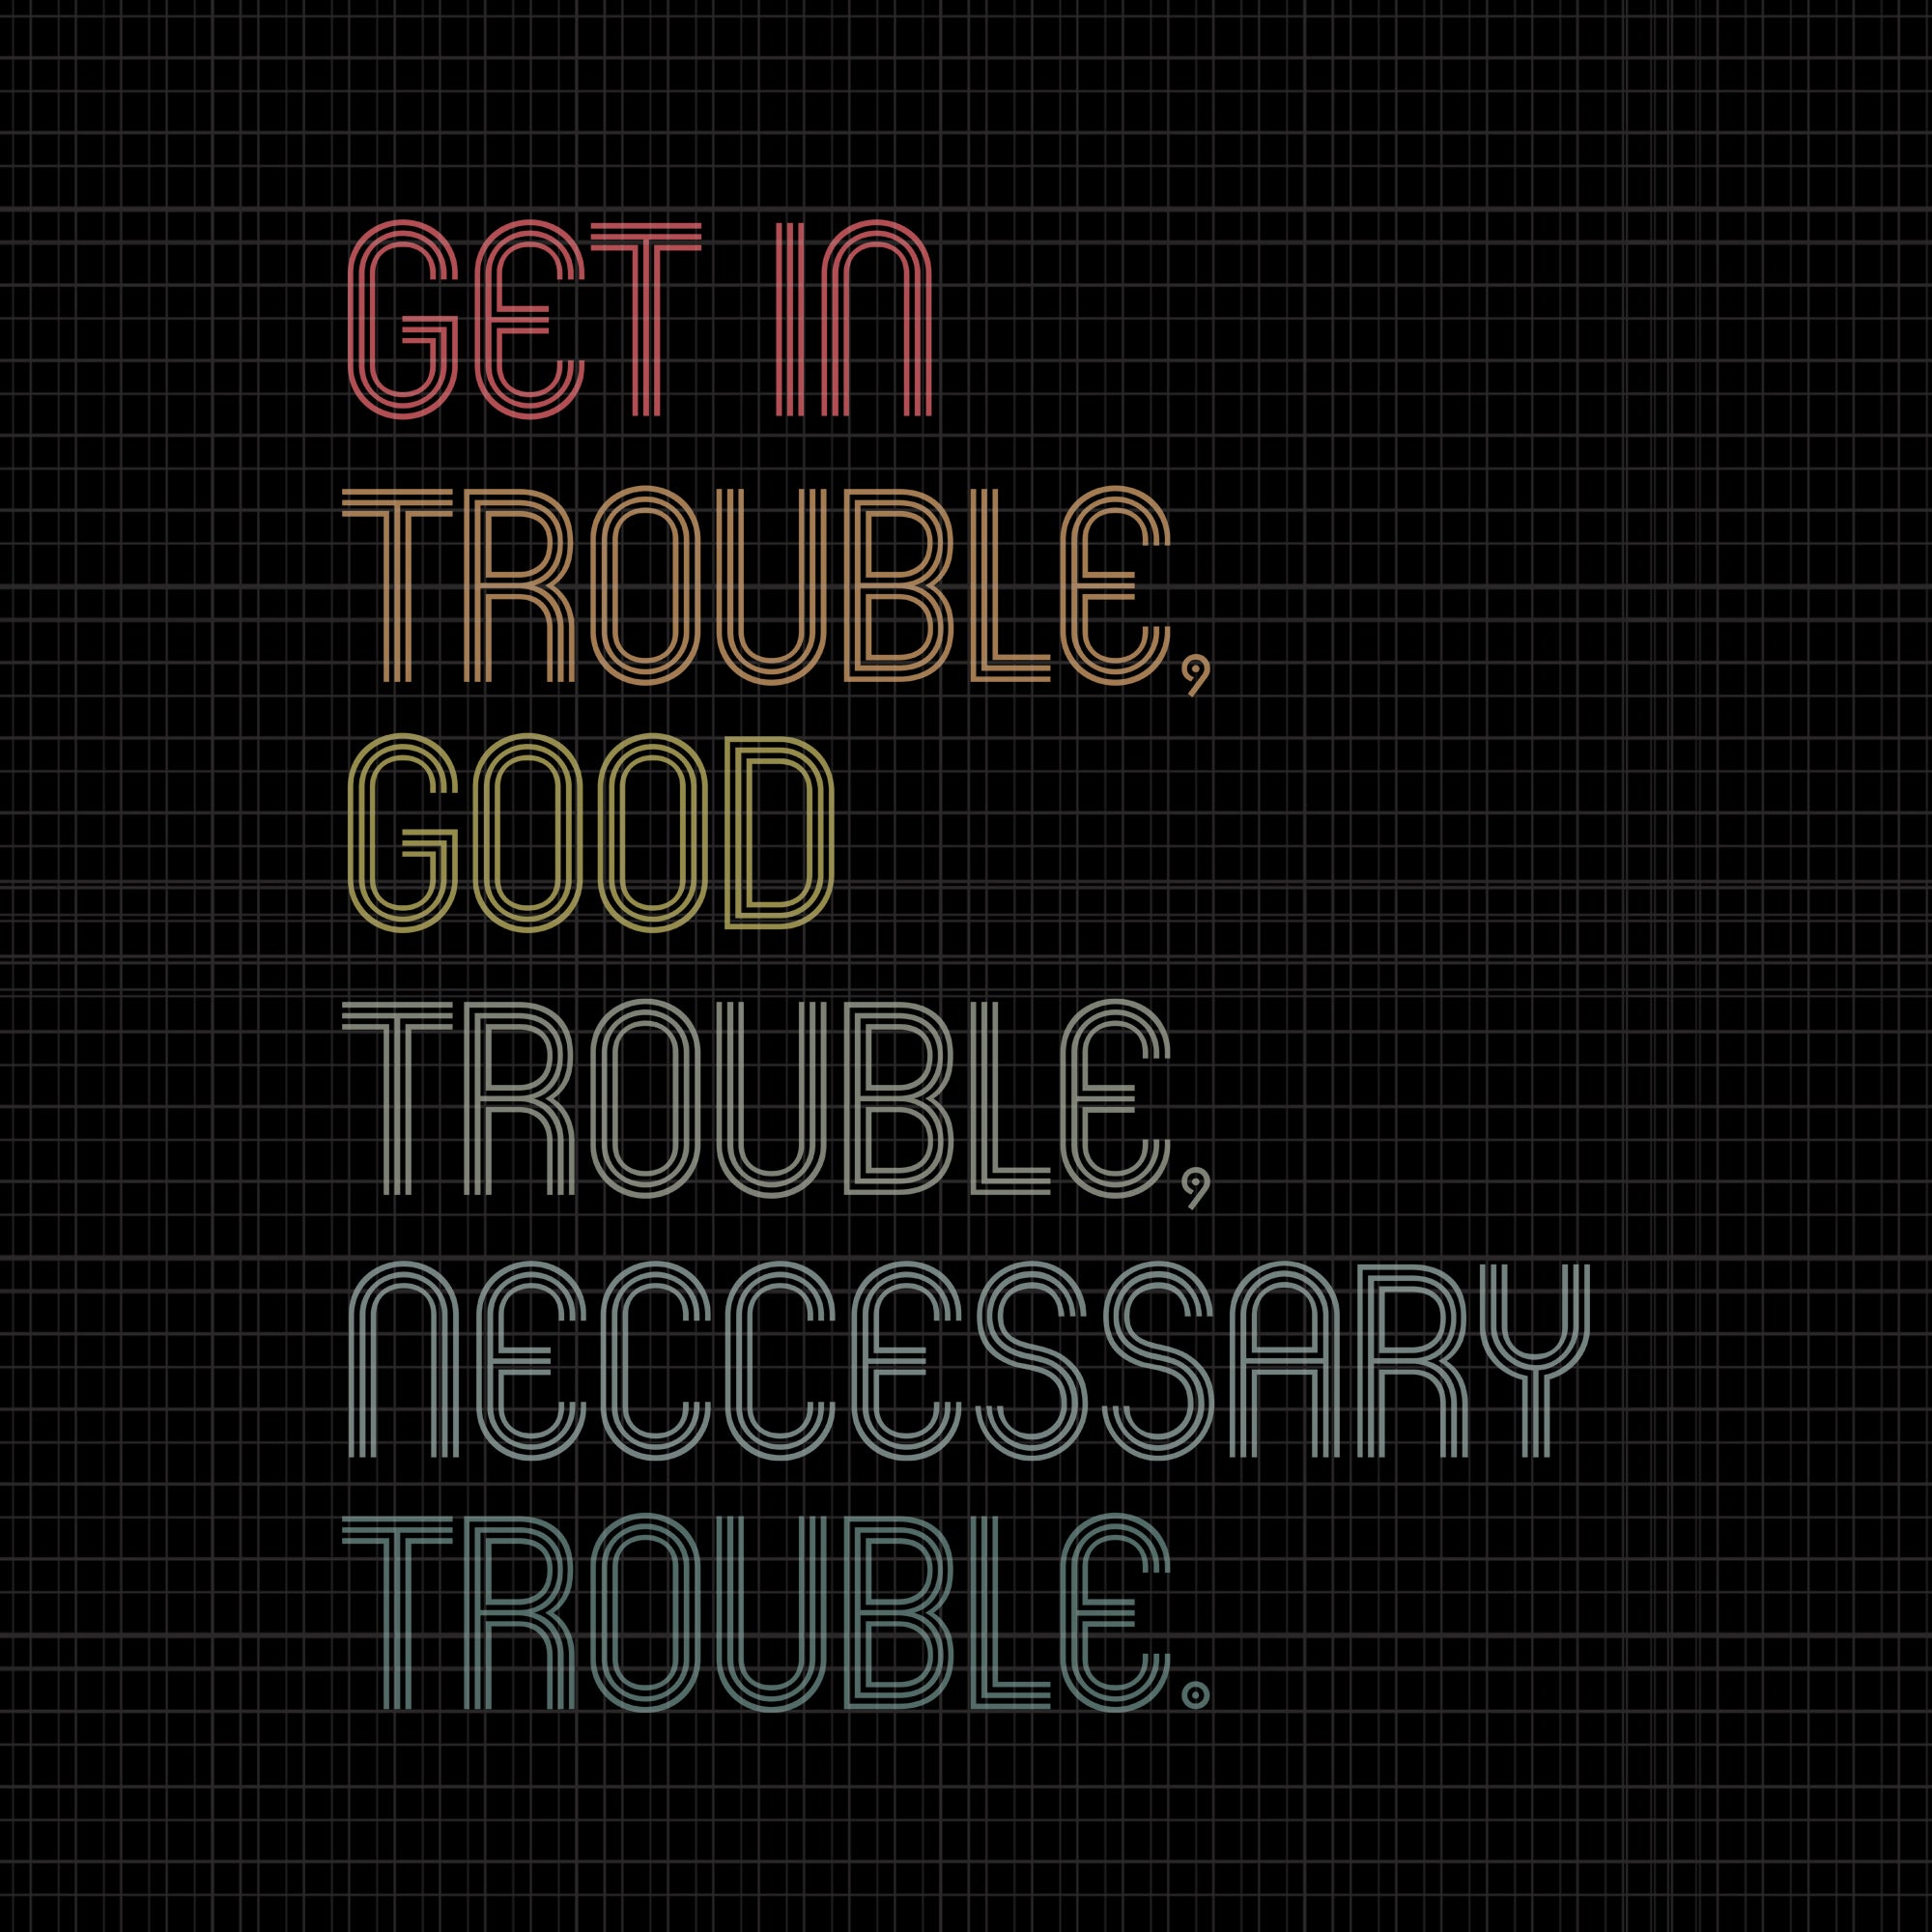 Good trouble svg, good trouble, get in trouble svg, get in trouble, get in good necessary trouble social justice svg, get in good necessary trouble social justice